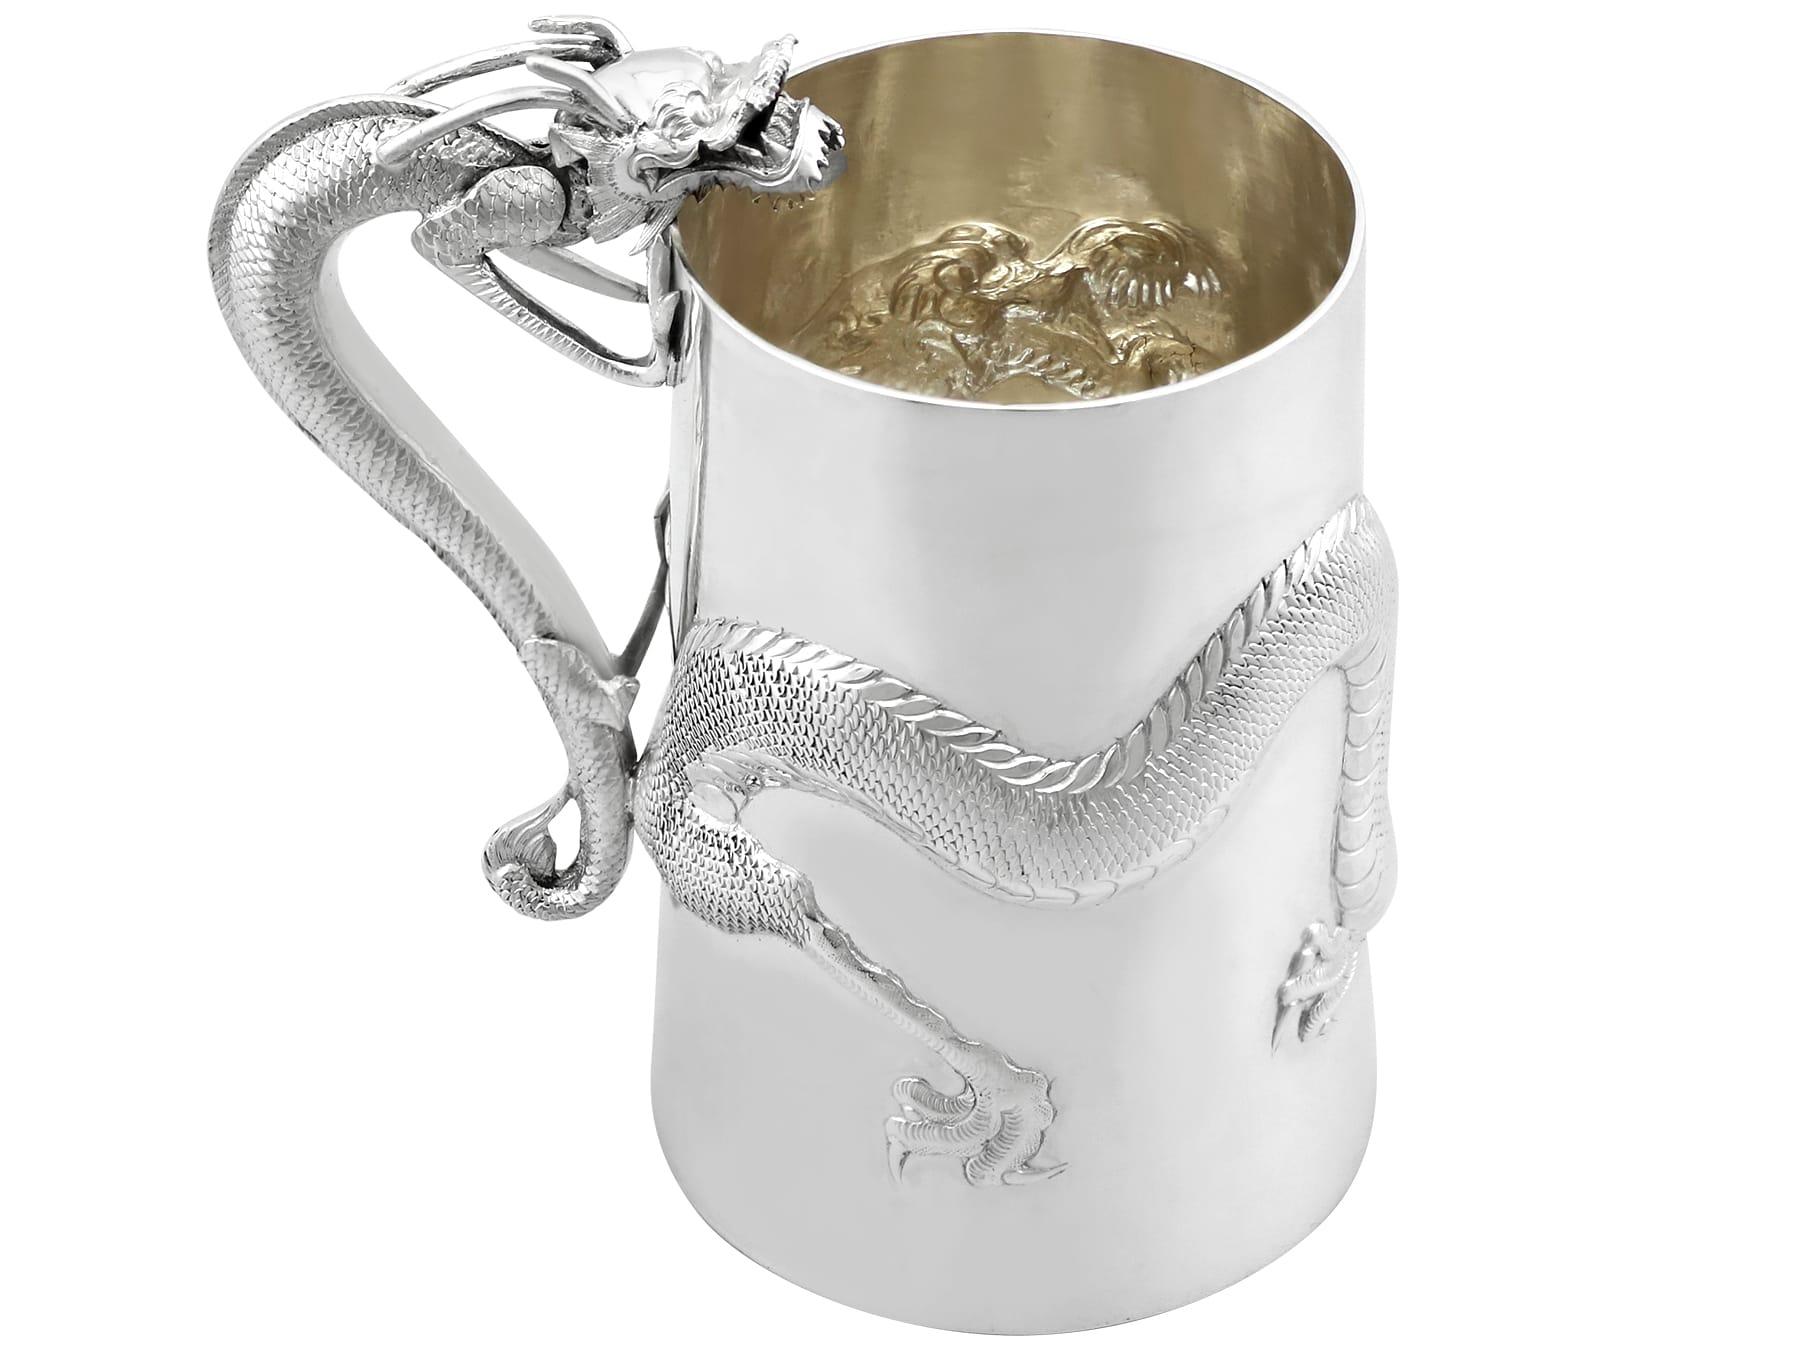 An exceptional, fine and impressive antique Chinese Export Silver mug with dragons; an addition to our oriental silverware collection.

This exceptional antique Chinese silver mug has a tapering cylindrical form.

The surface of the mug is